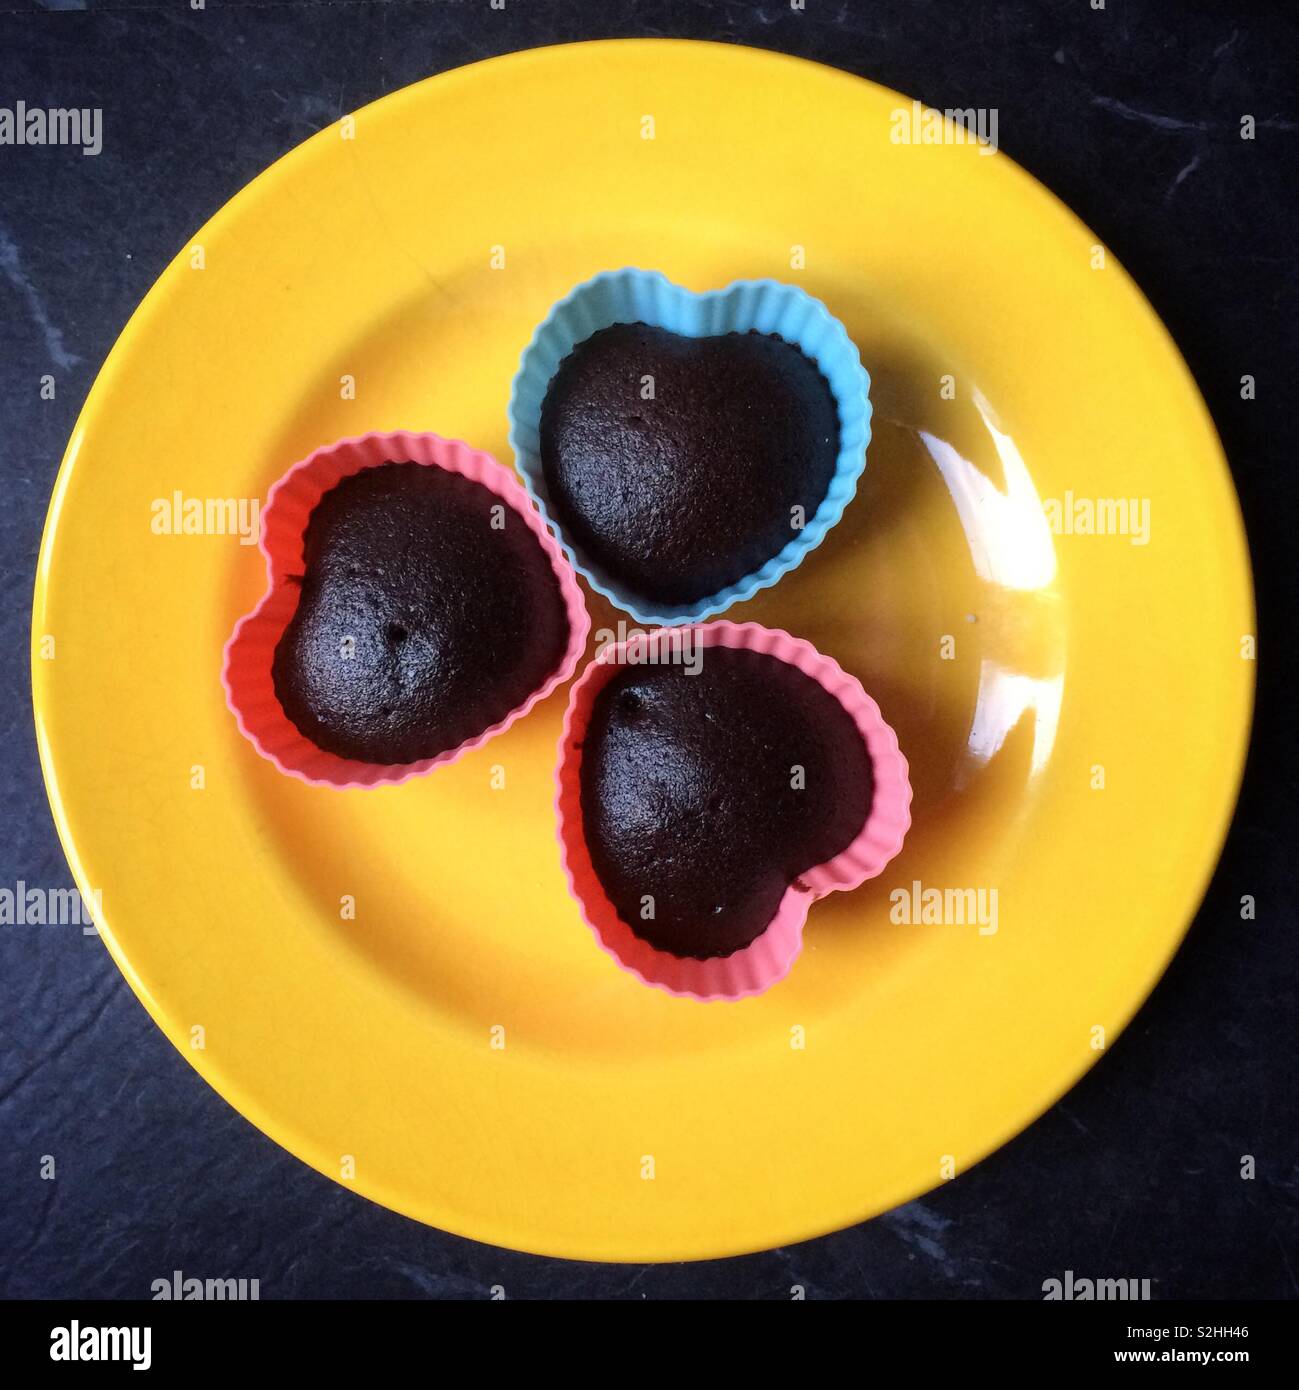 Three heart shaped chocolate cupcakes on a bright yellow plate Stock Photo